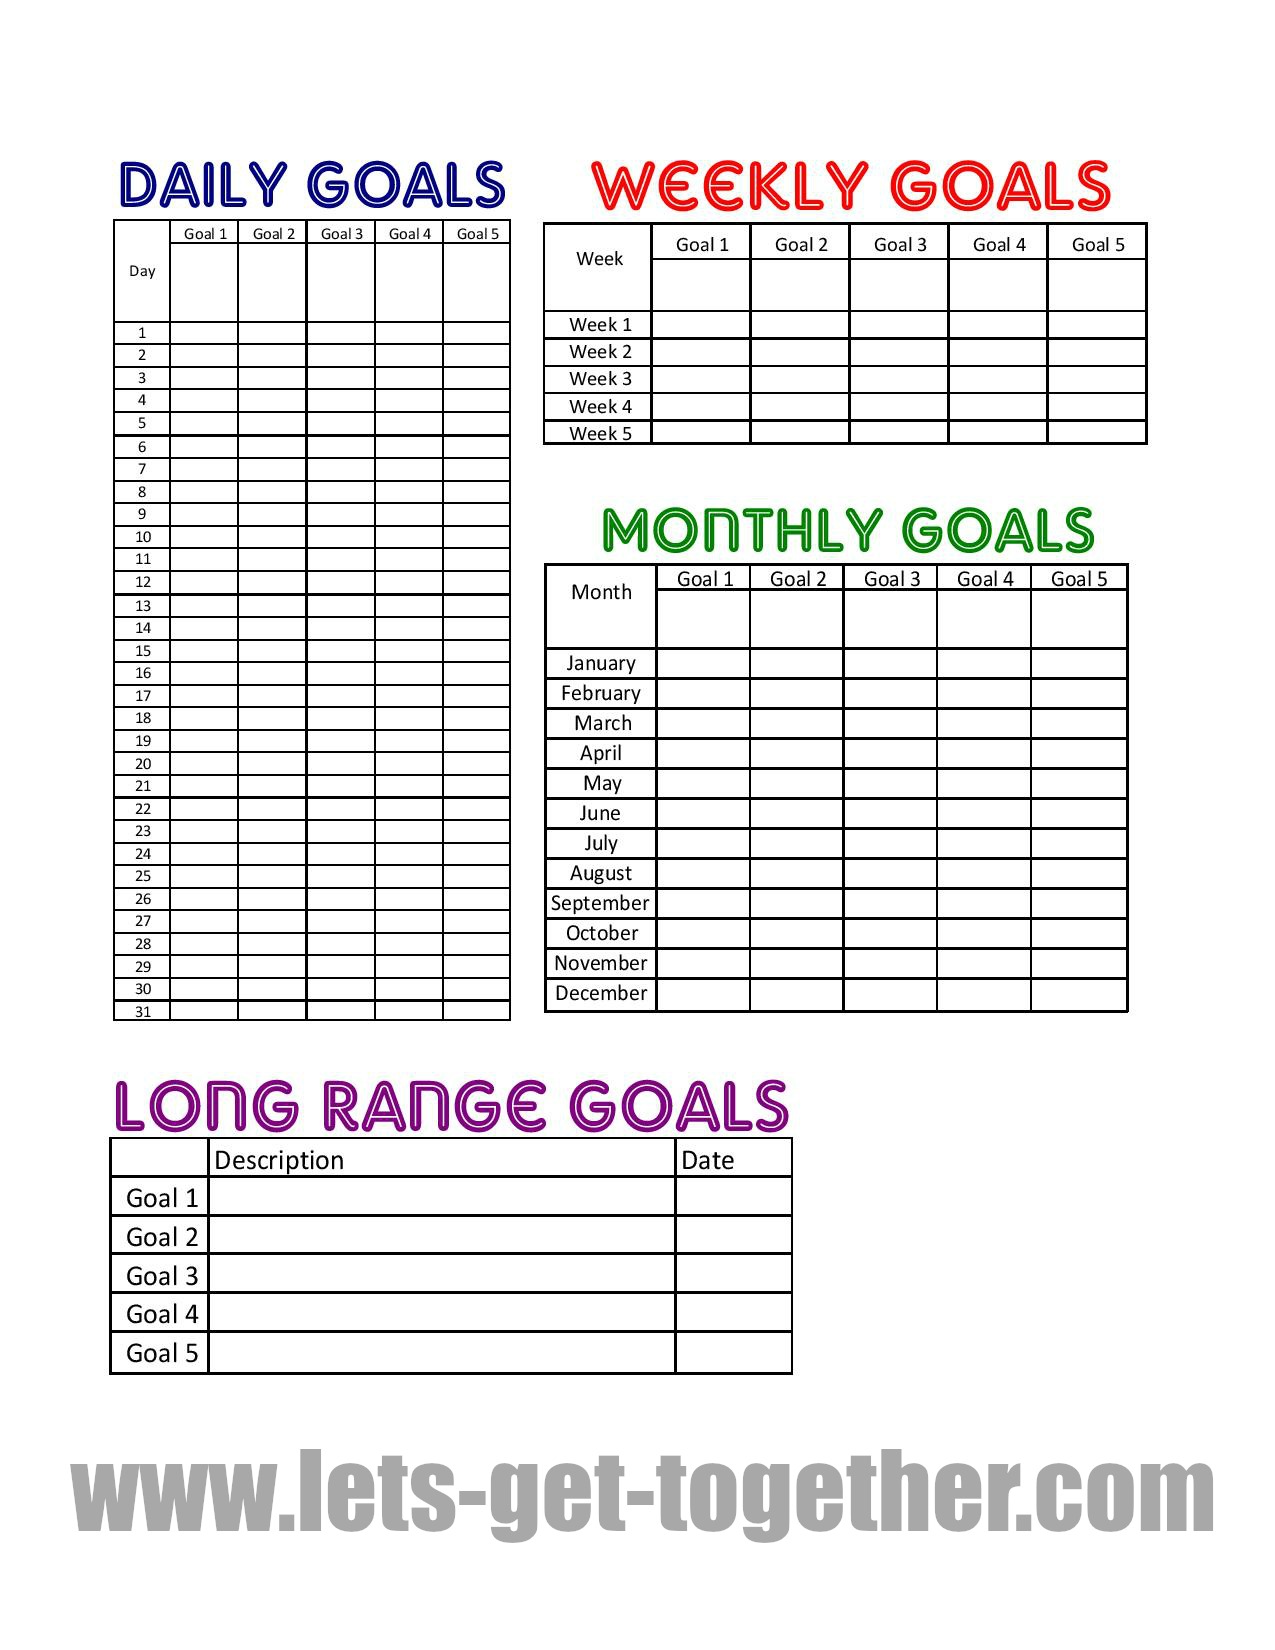 6-best-images-of-printable-weight-loss-goal-setting-worksheet-weight-loss-goal-setting